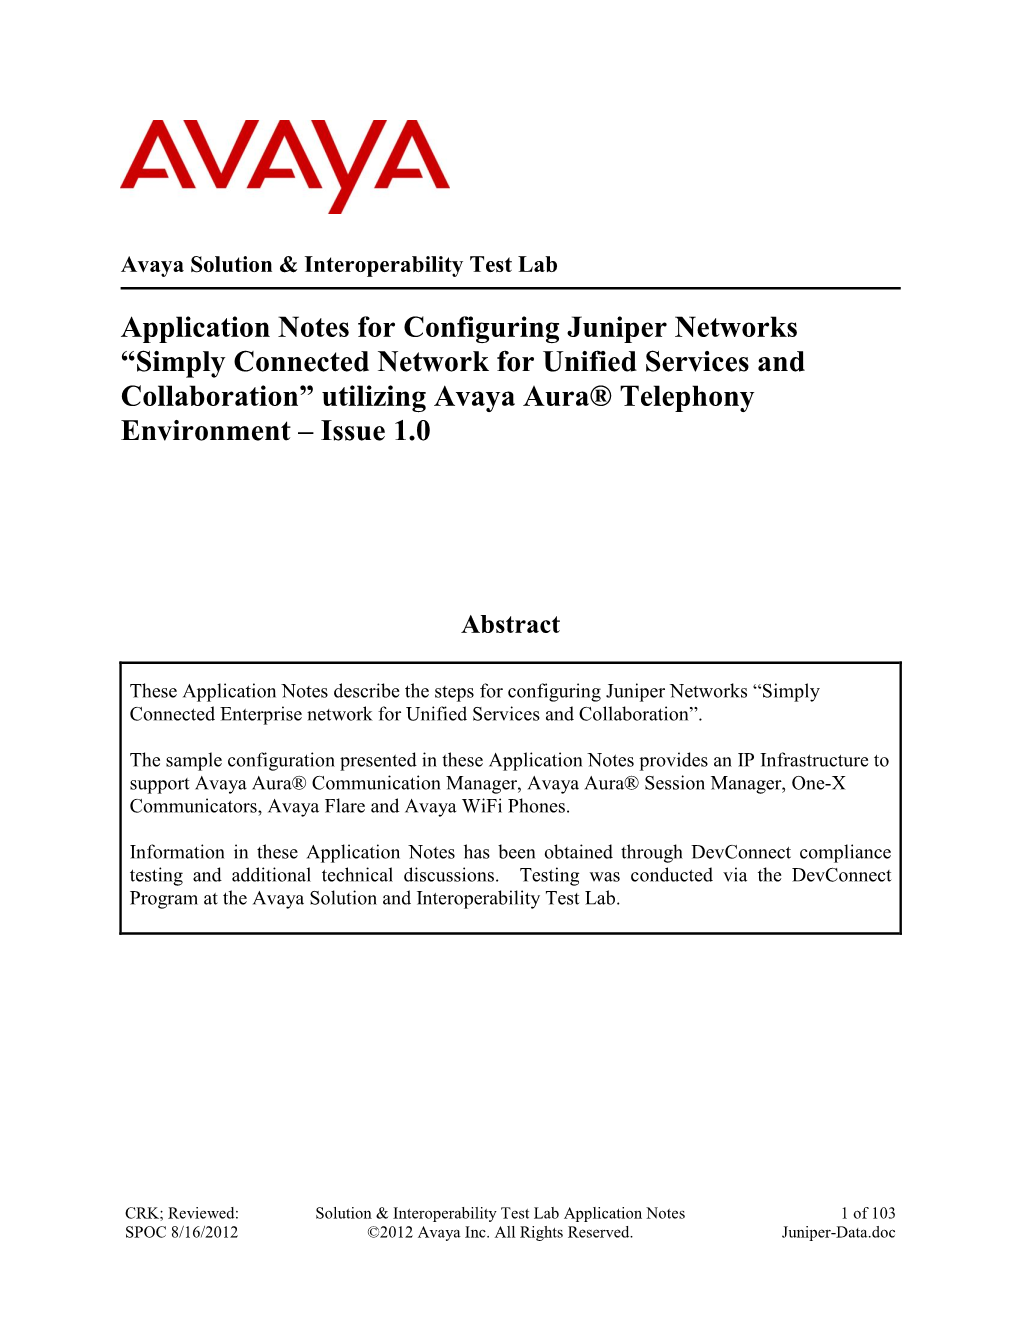 Application Notes for Configuring Juniper Networks